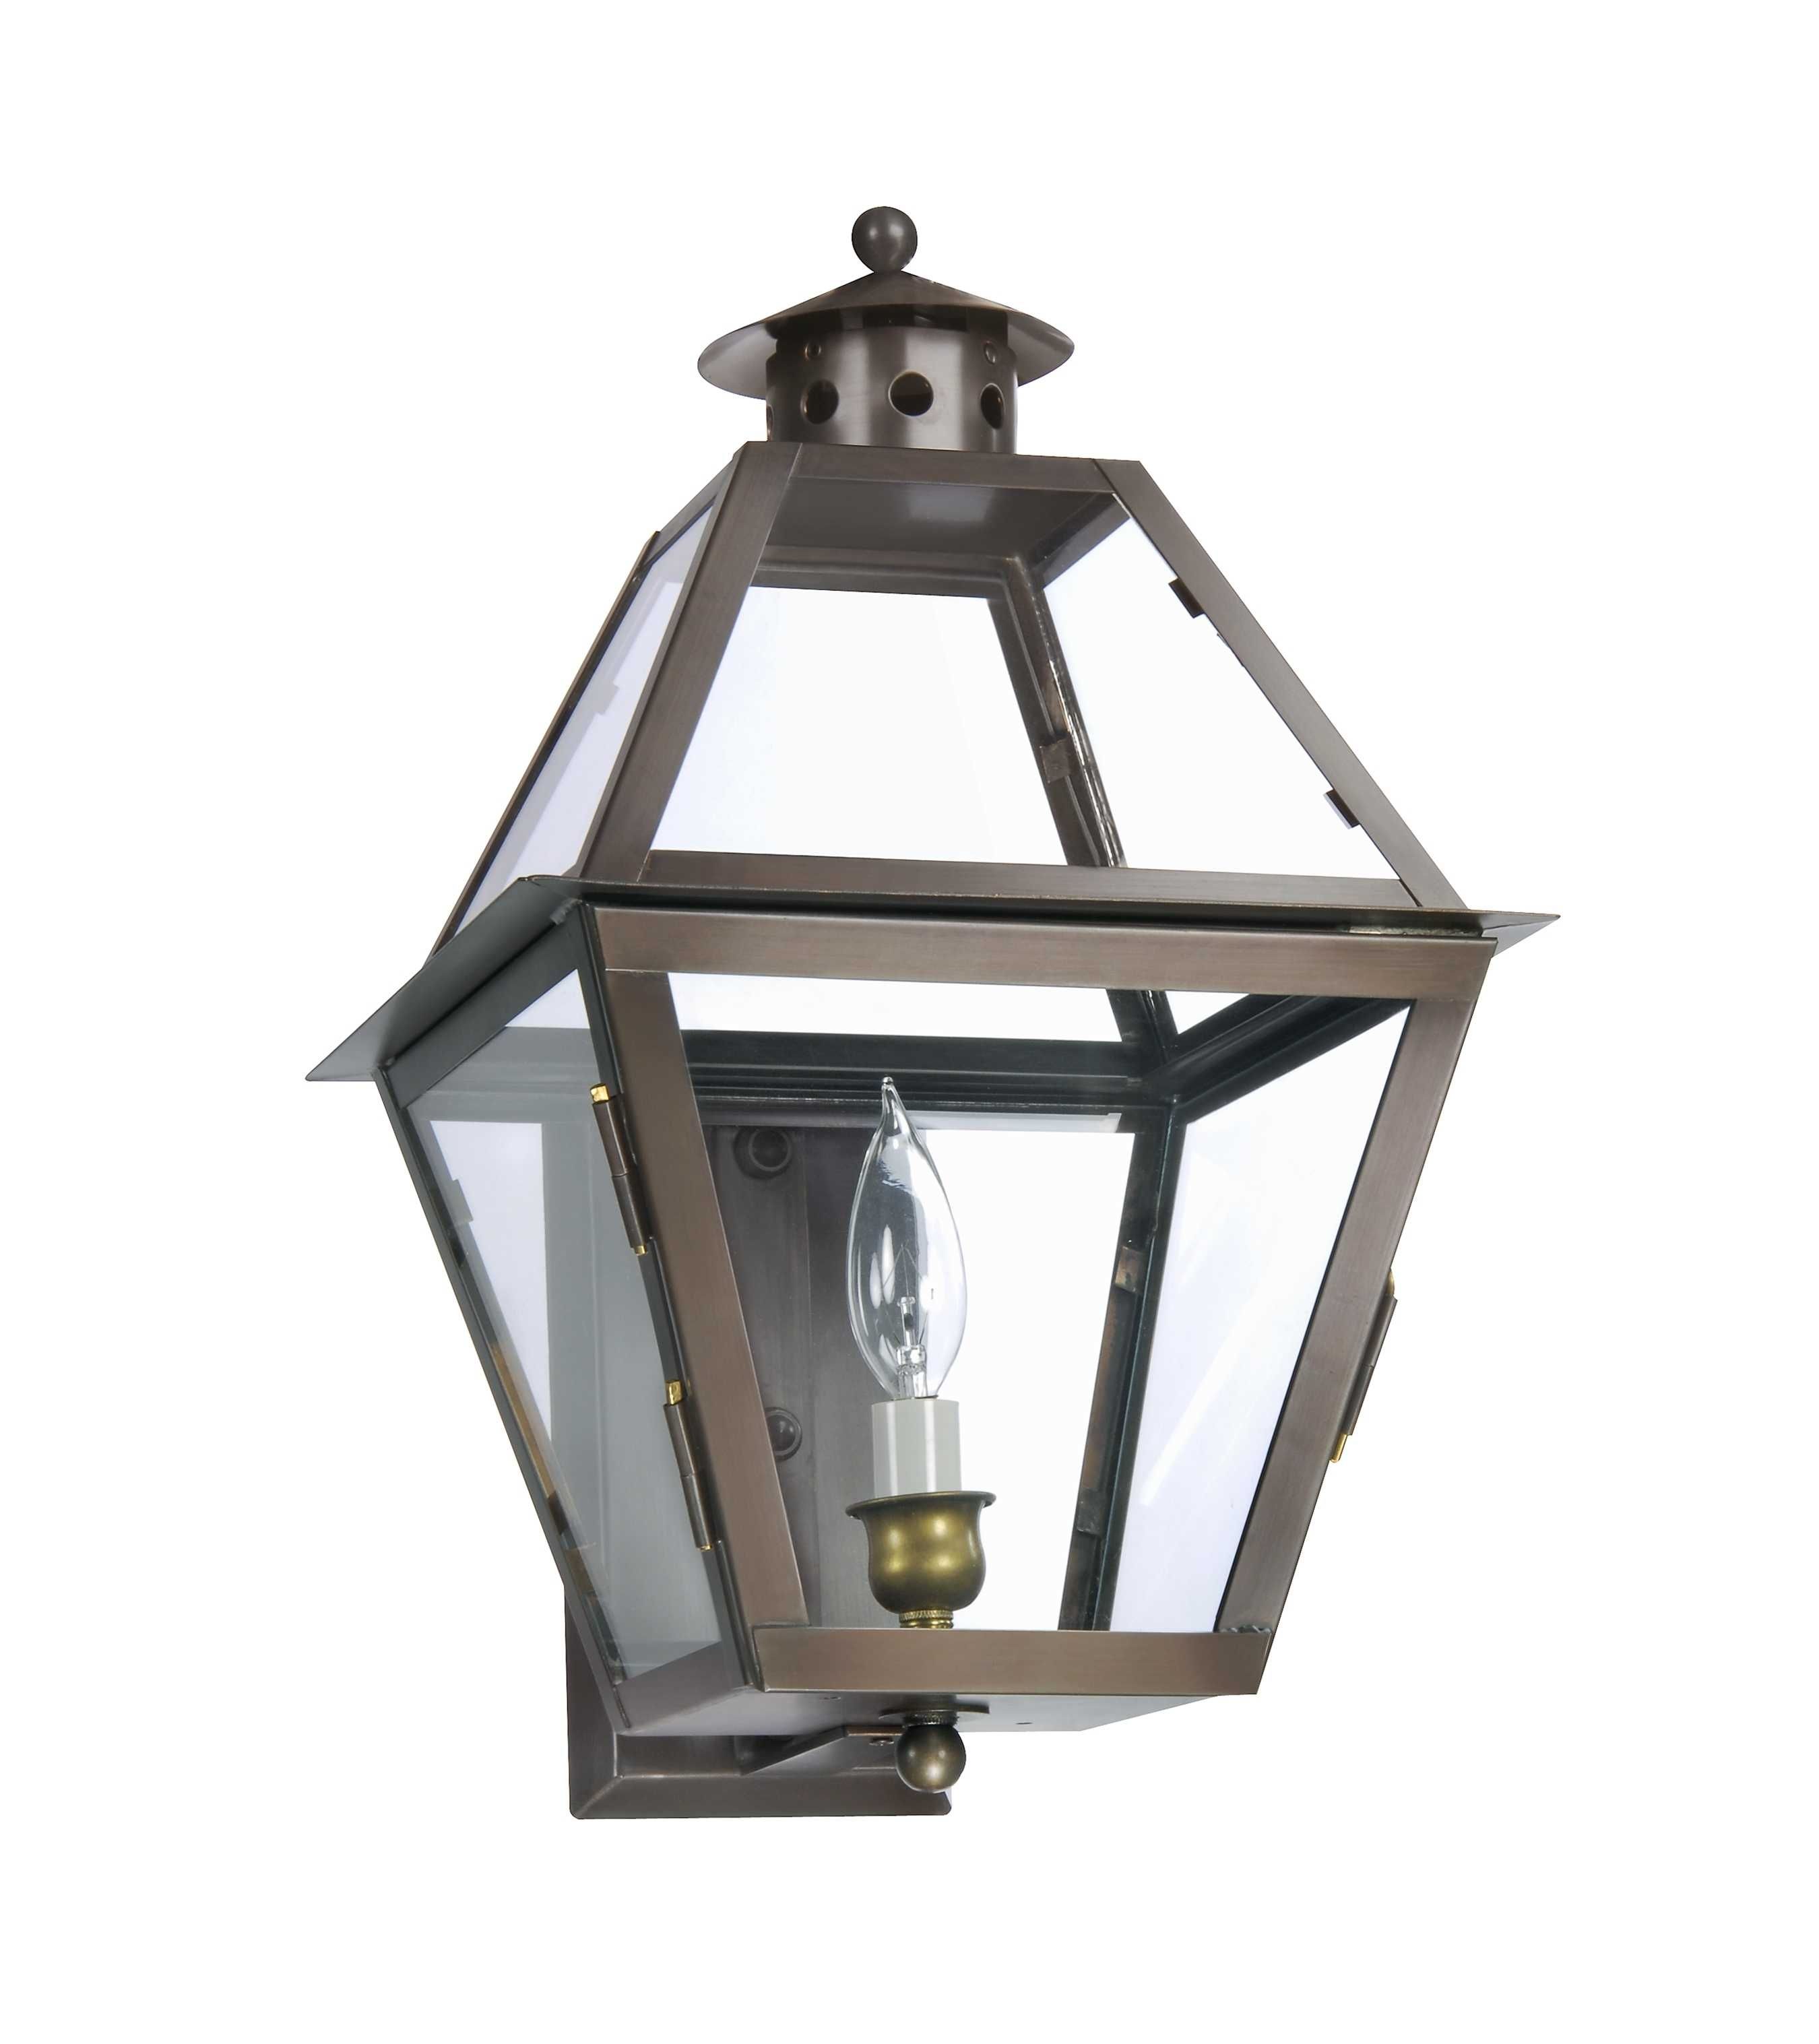 Outdoor Lanterns | Copper Exterior Lighting – Lantern & Scroll With Regard To Outdoor Wall Lights For Coastal Areas (View 8 of 15)